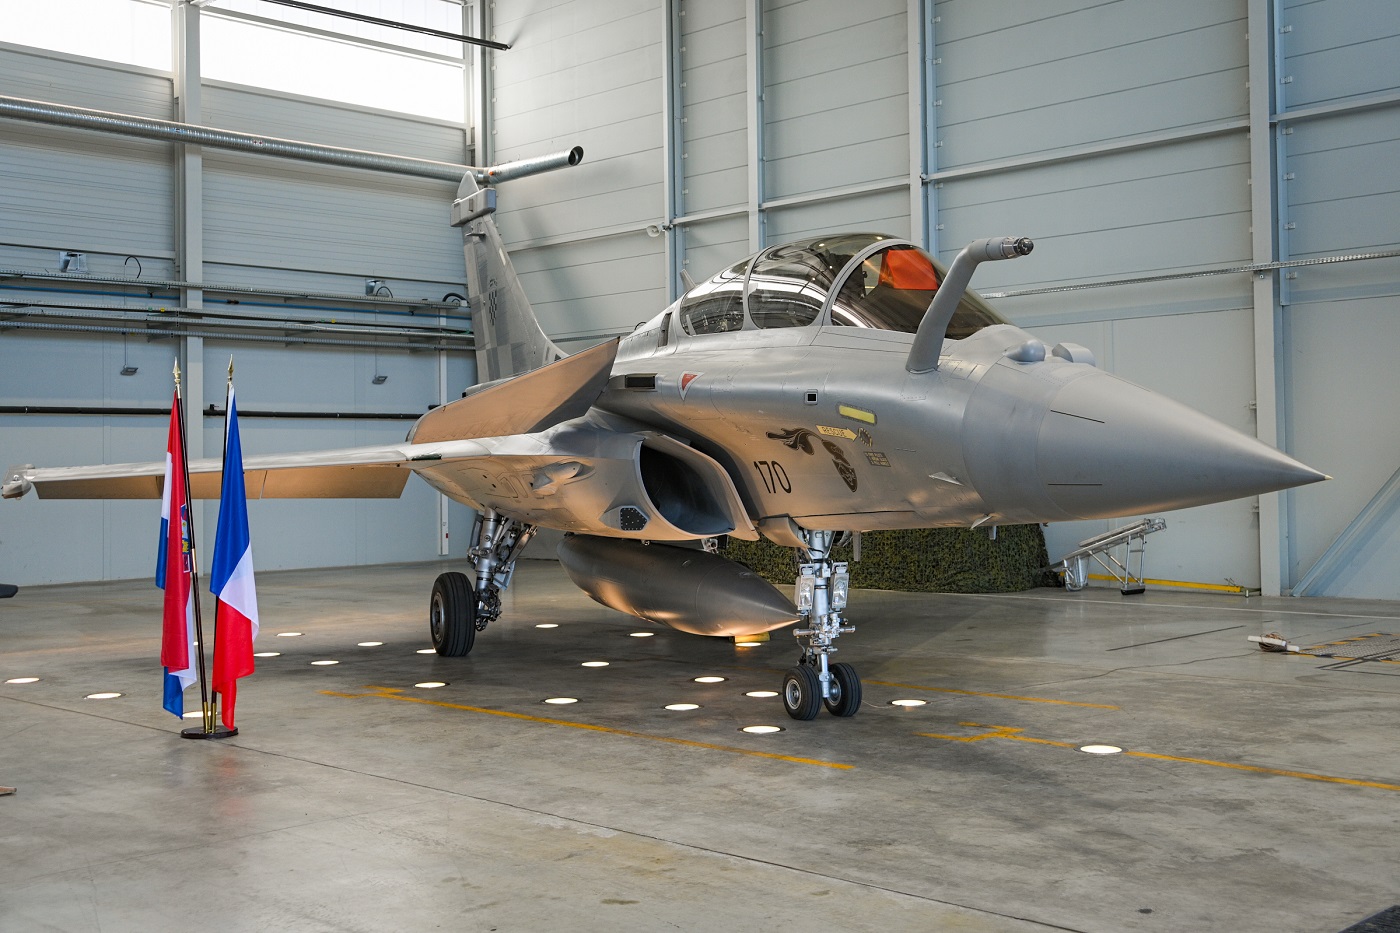 This is the first of 12 Rafale twin-engine aircraft for the Croatian Air Force from the French manufacturer Dassault Aviation